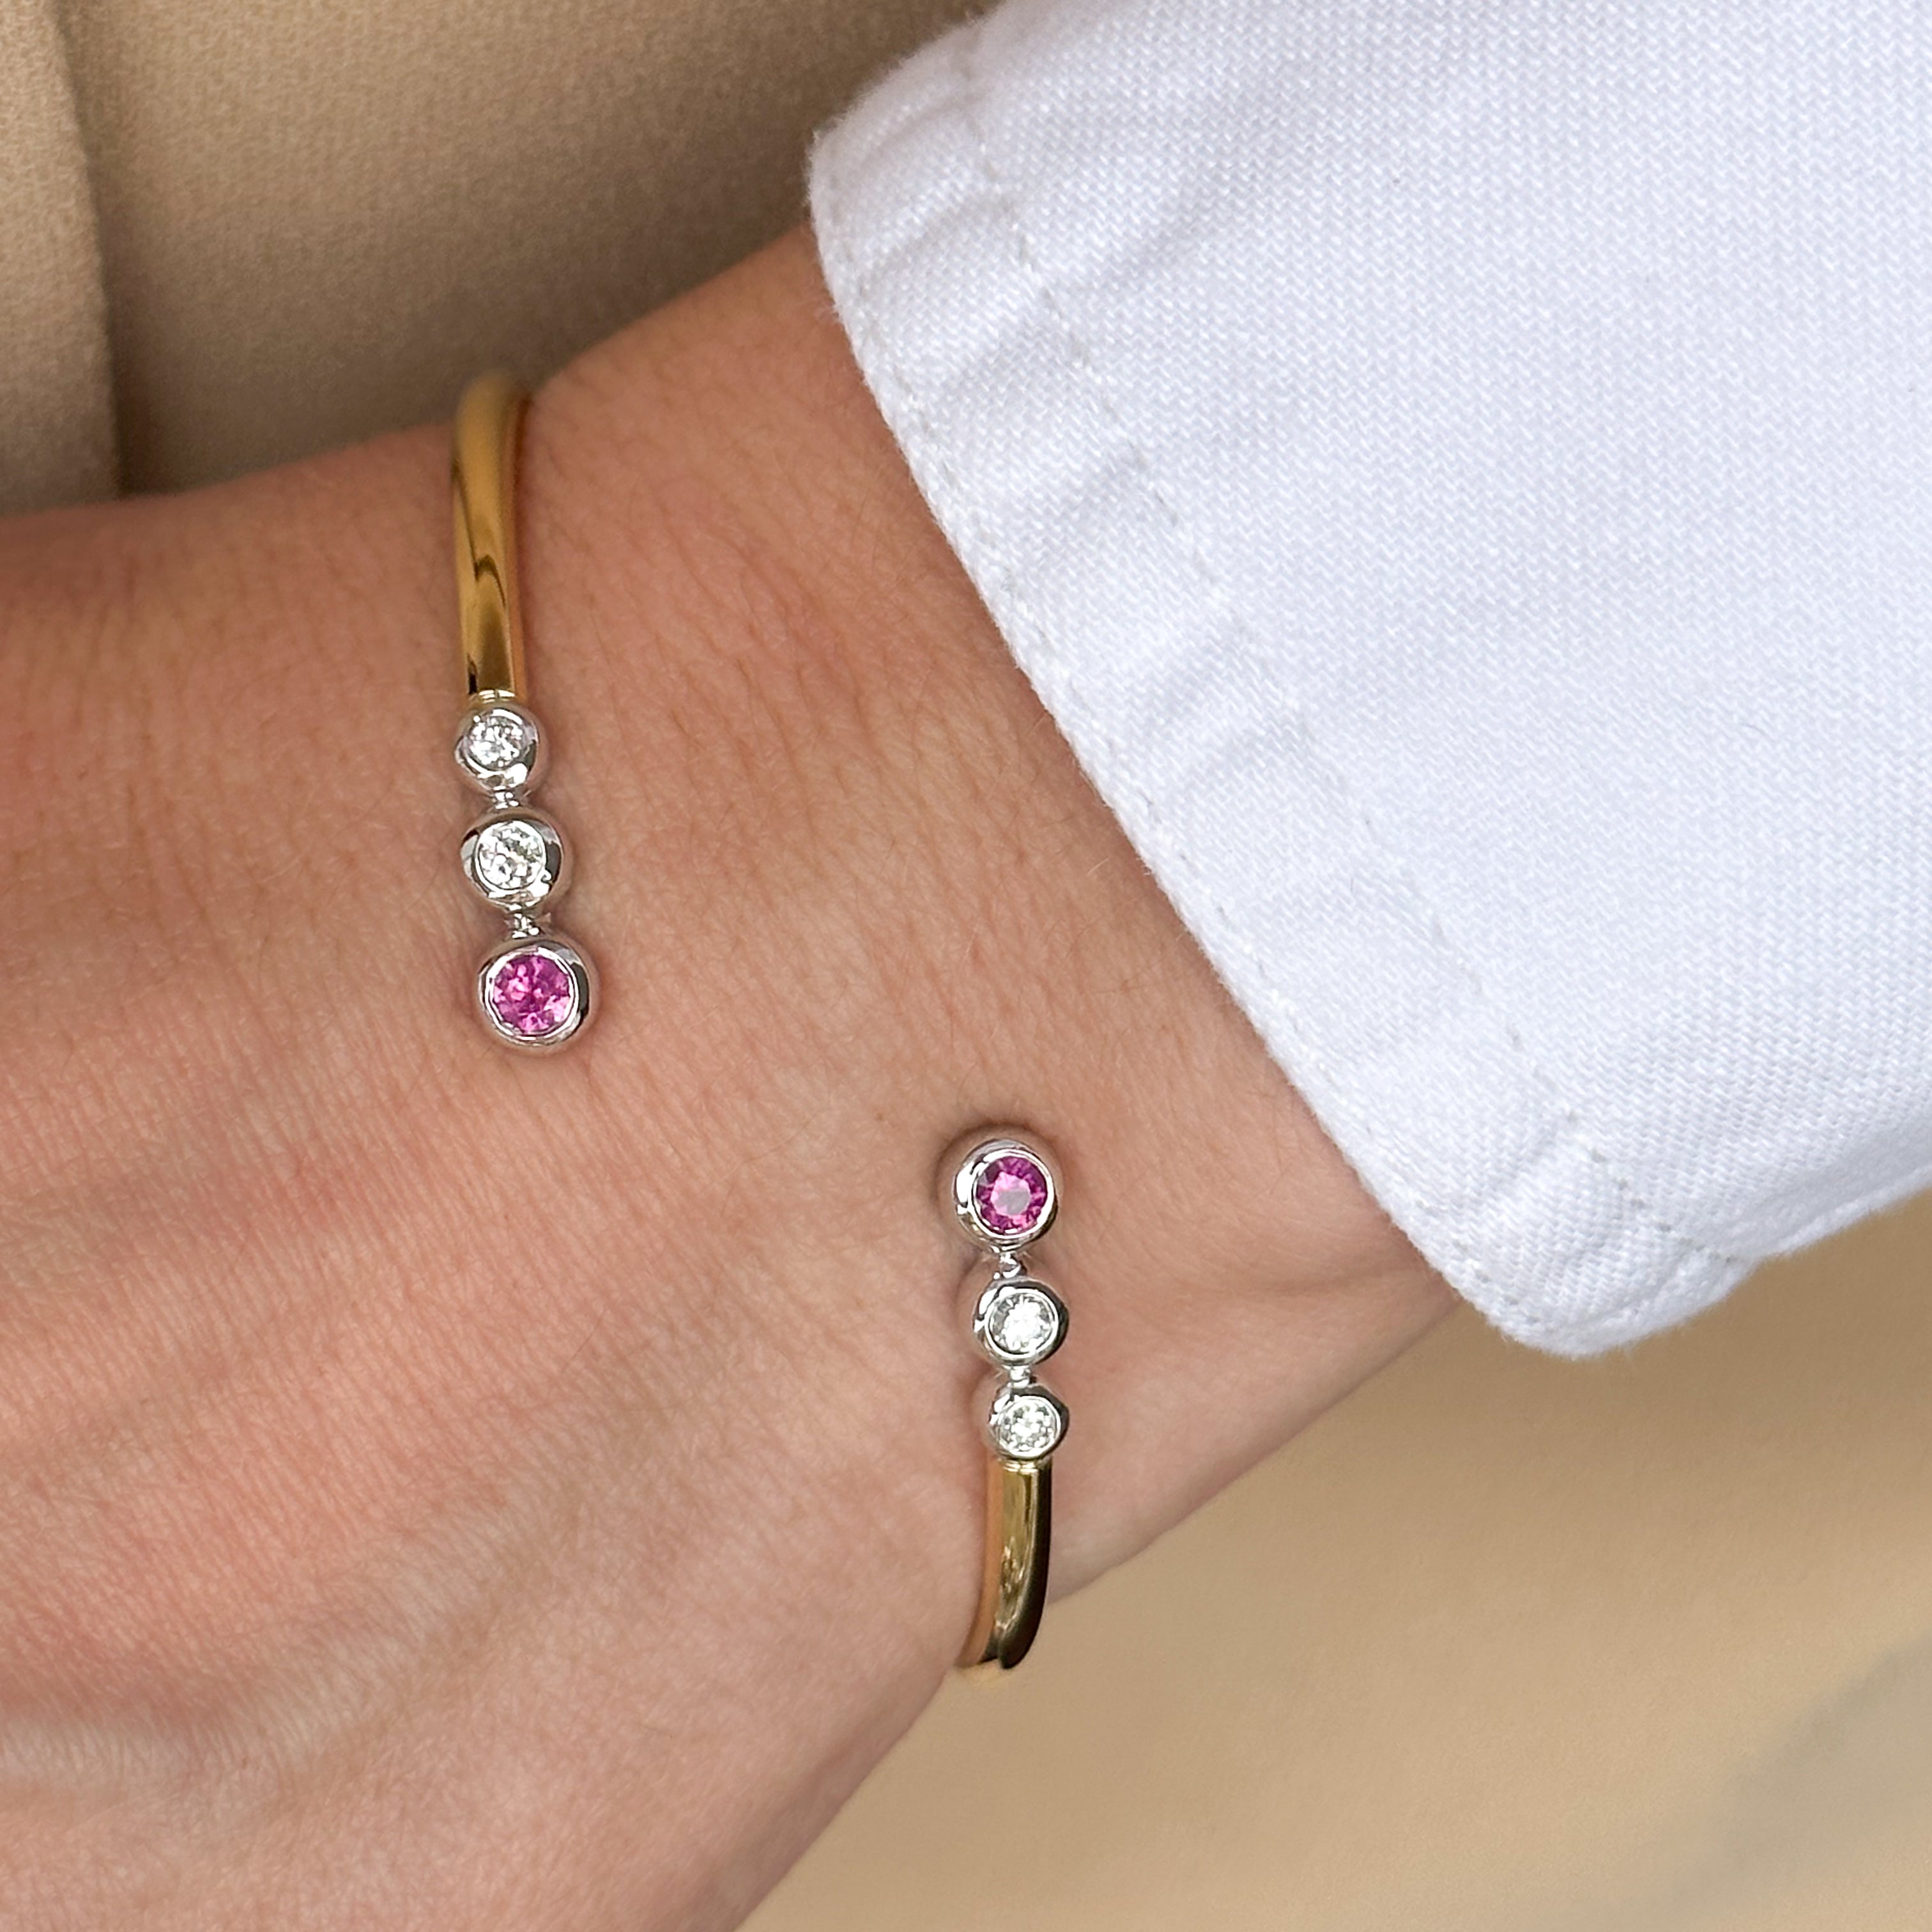 Yellow Gold Bracelet with Rubies and Diamonds